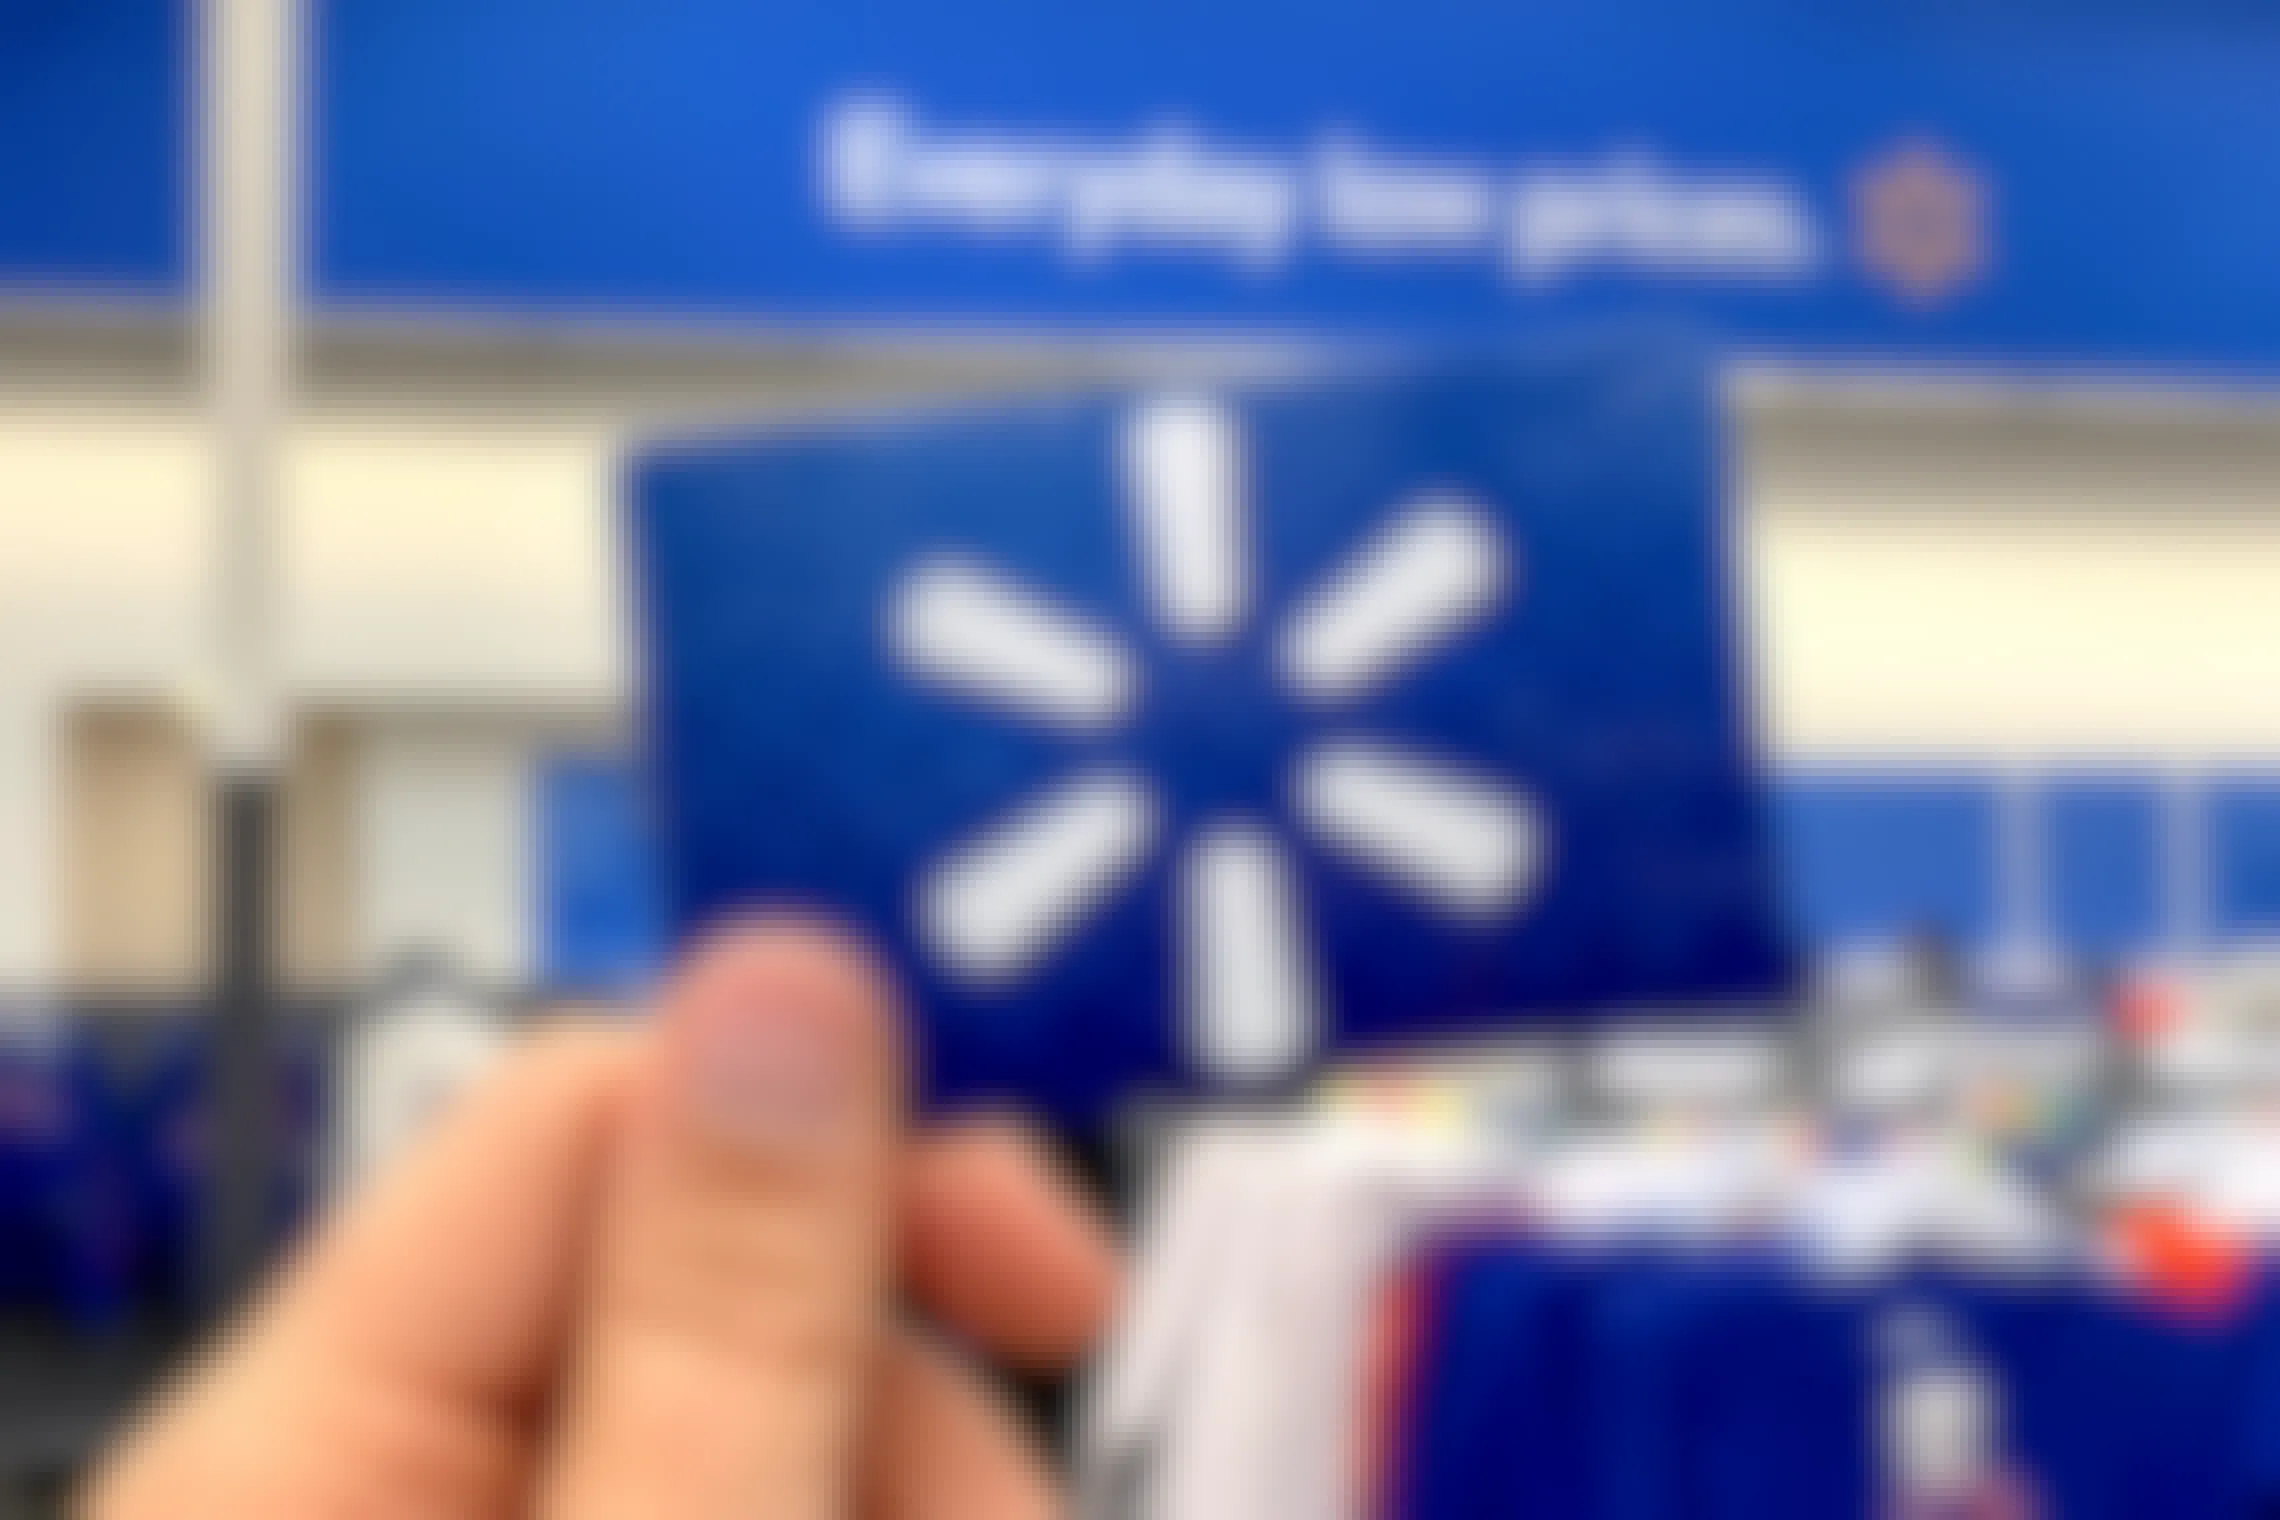 earn free gifts cards - Walmart gift card held up in store with Walmart logo in background